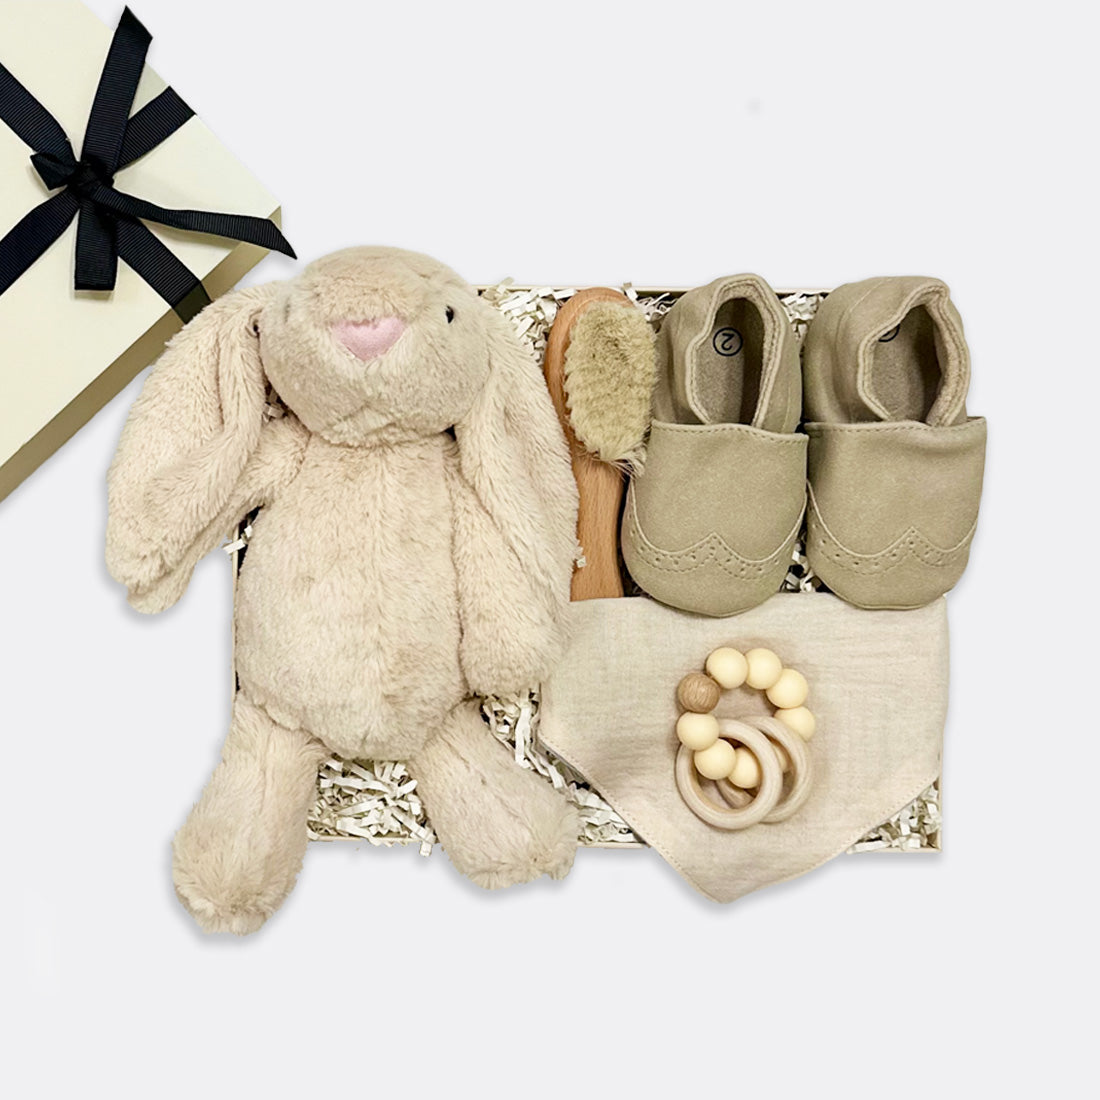 Hun Bun Soft toy | Cream My Moccasin | Off-white (from birth up to 12 months) Baby Cotton Bib Boule Teether Baby Brush, shop the best Christmas gift gifts for her for him from Inna carton online store dubai, UAE!